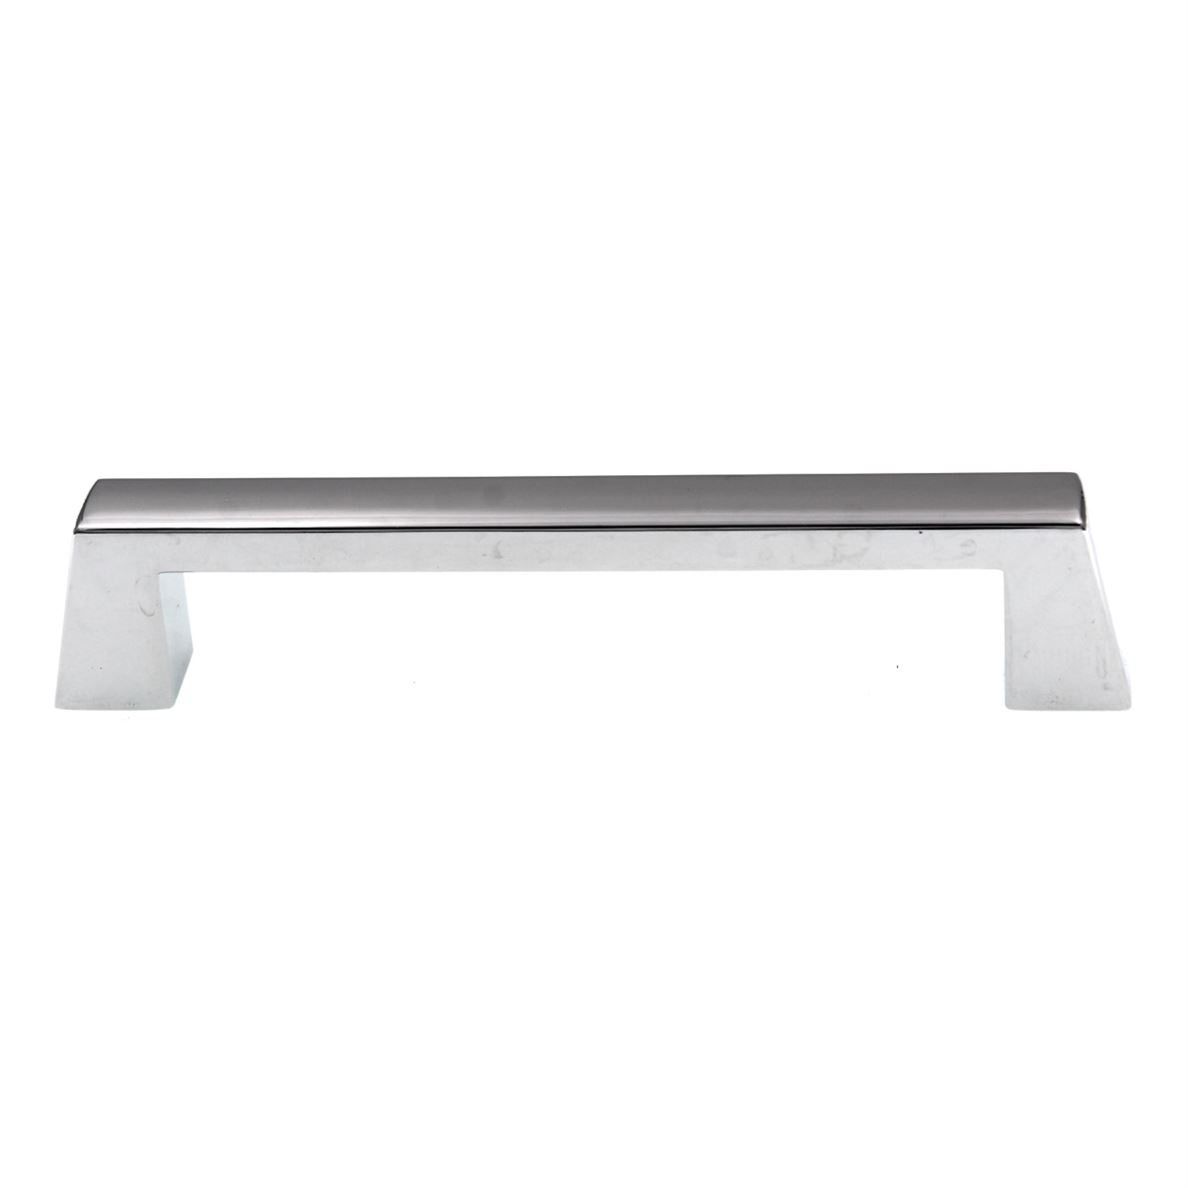 Pride Colorado Cabinet Arch Pull 5" (128mm) Ctr Polished Chrome P92837-PC